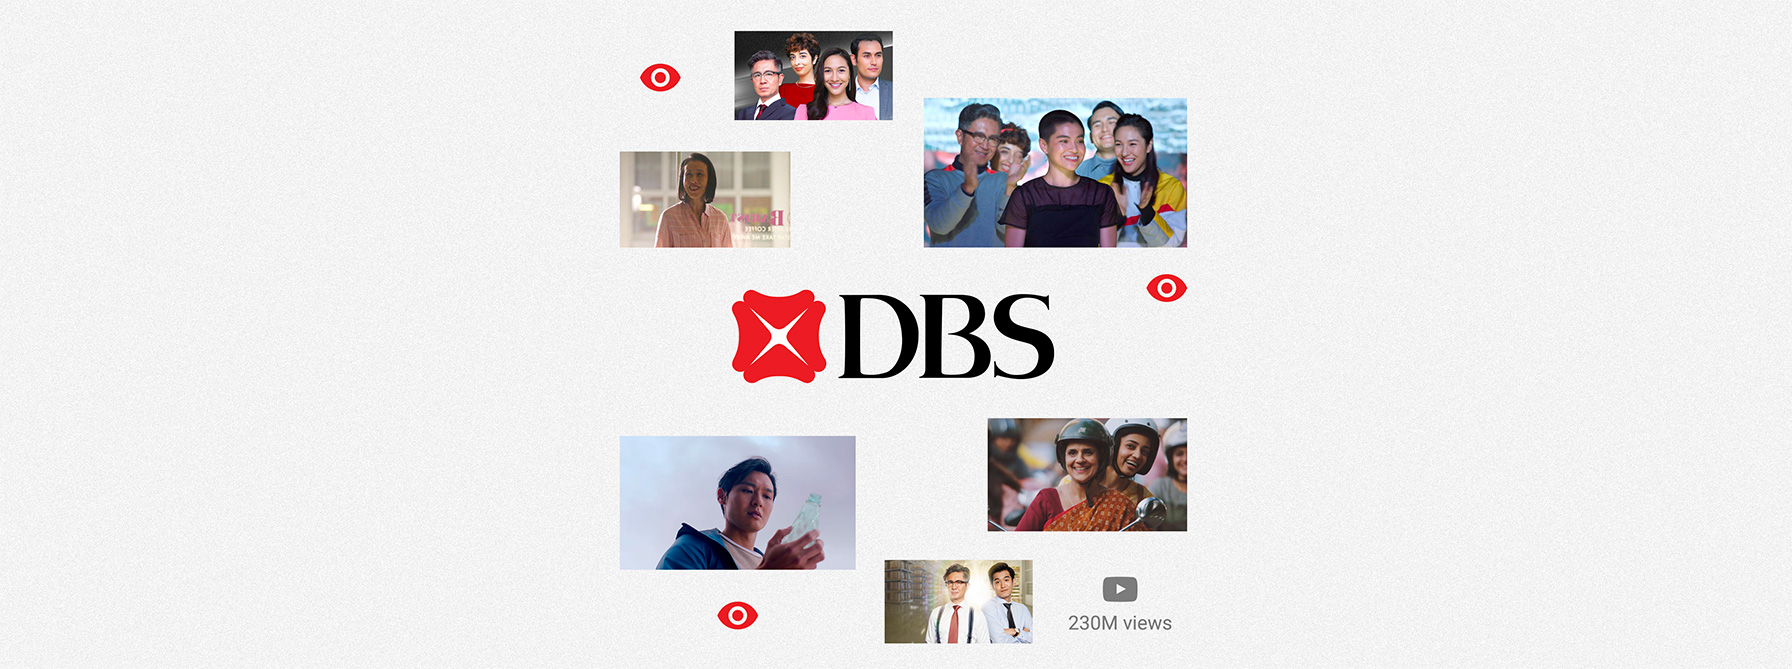 Case Study: DBS video campaign